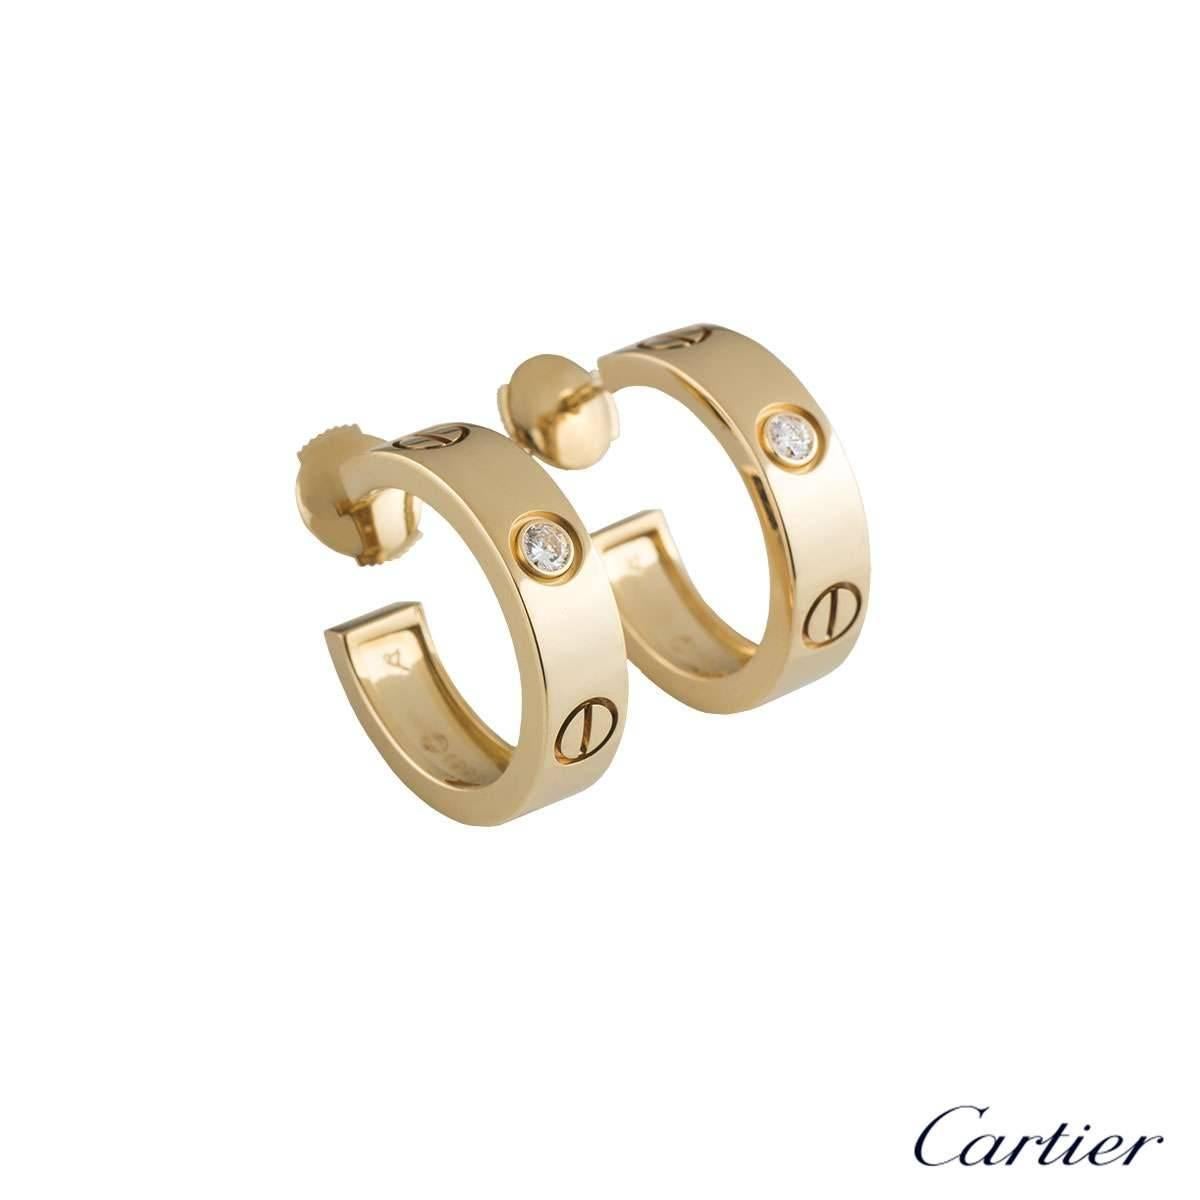 A pair of 18k yellow gold diamond earrings from the iconic Love collection by Cartier. Each hoop earring is set with 1 round brilliant cut diamond in a rubover setting, totalling 0.14ct. The earrings are 2 cm in length and 0.5cm in width and feature